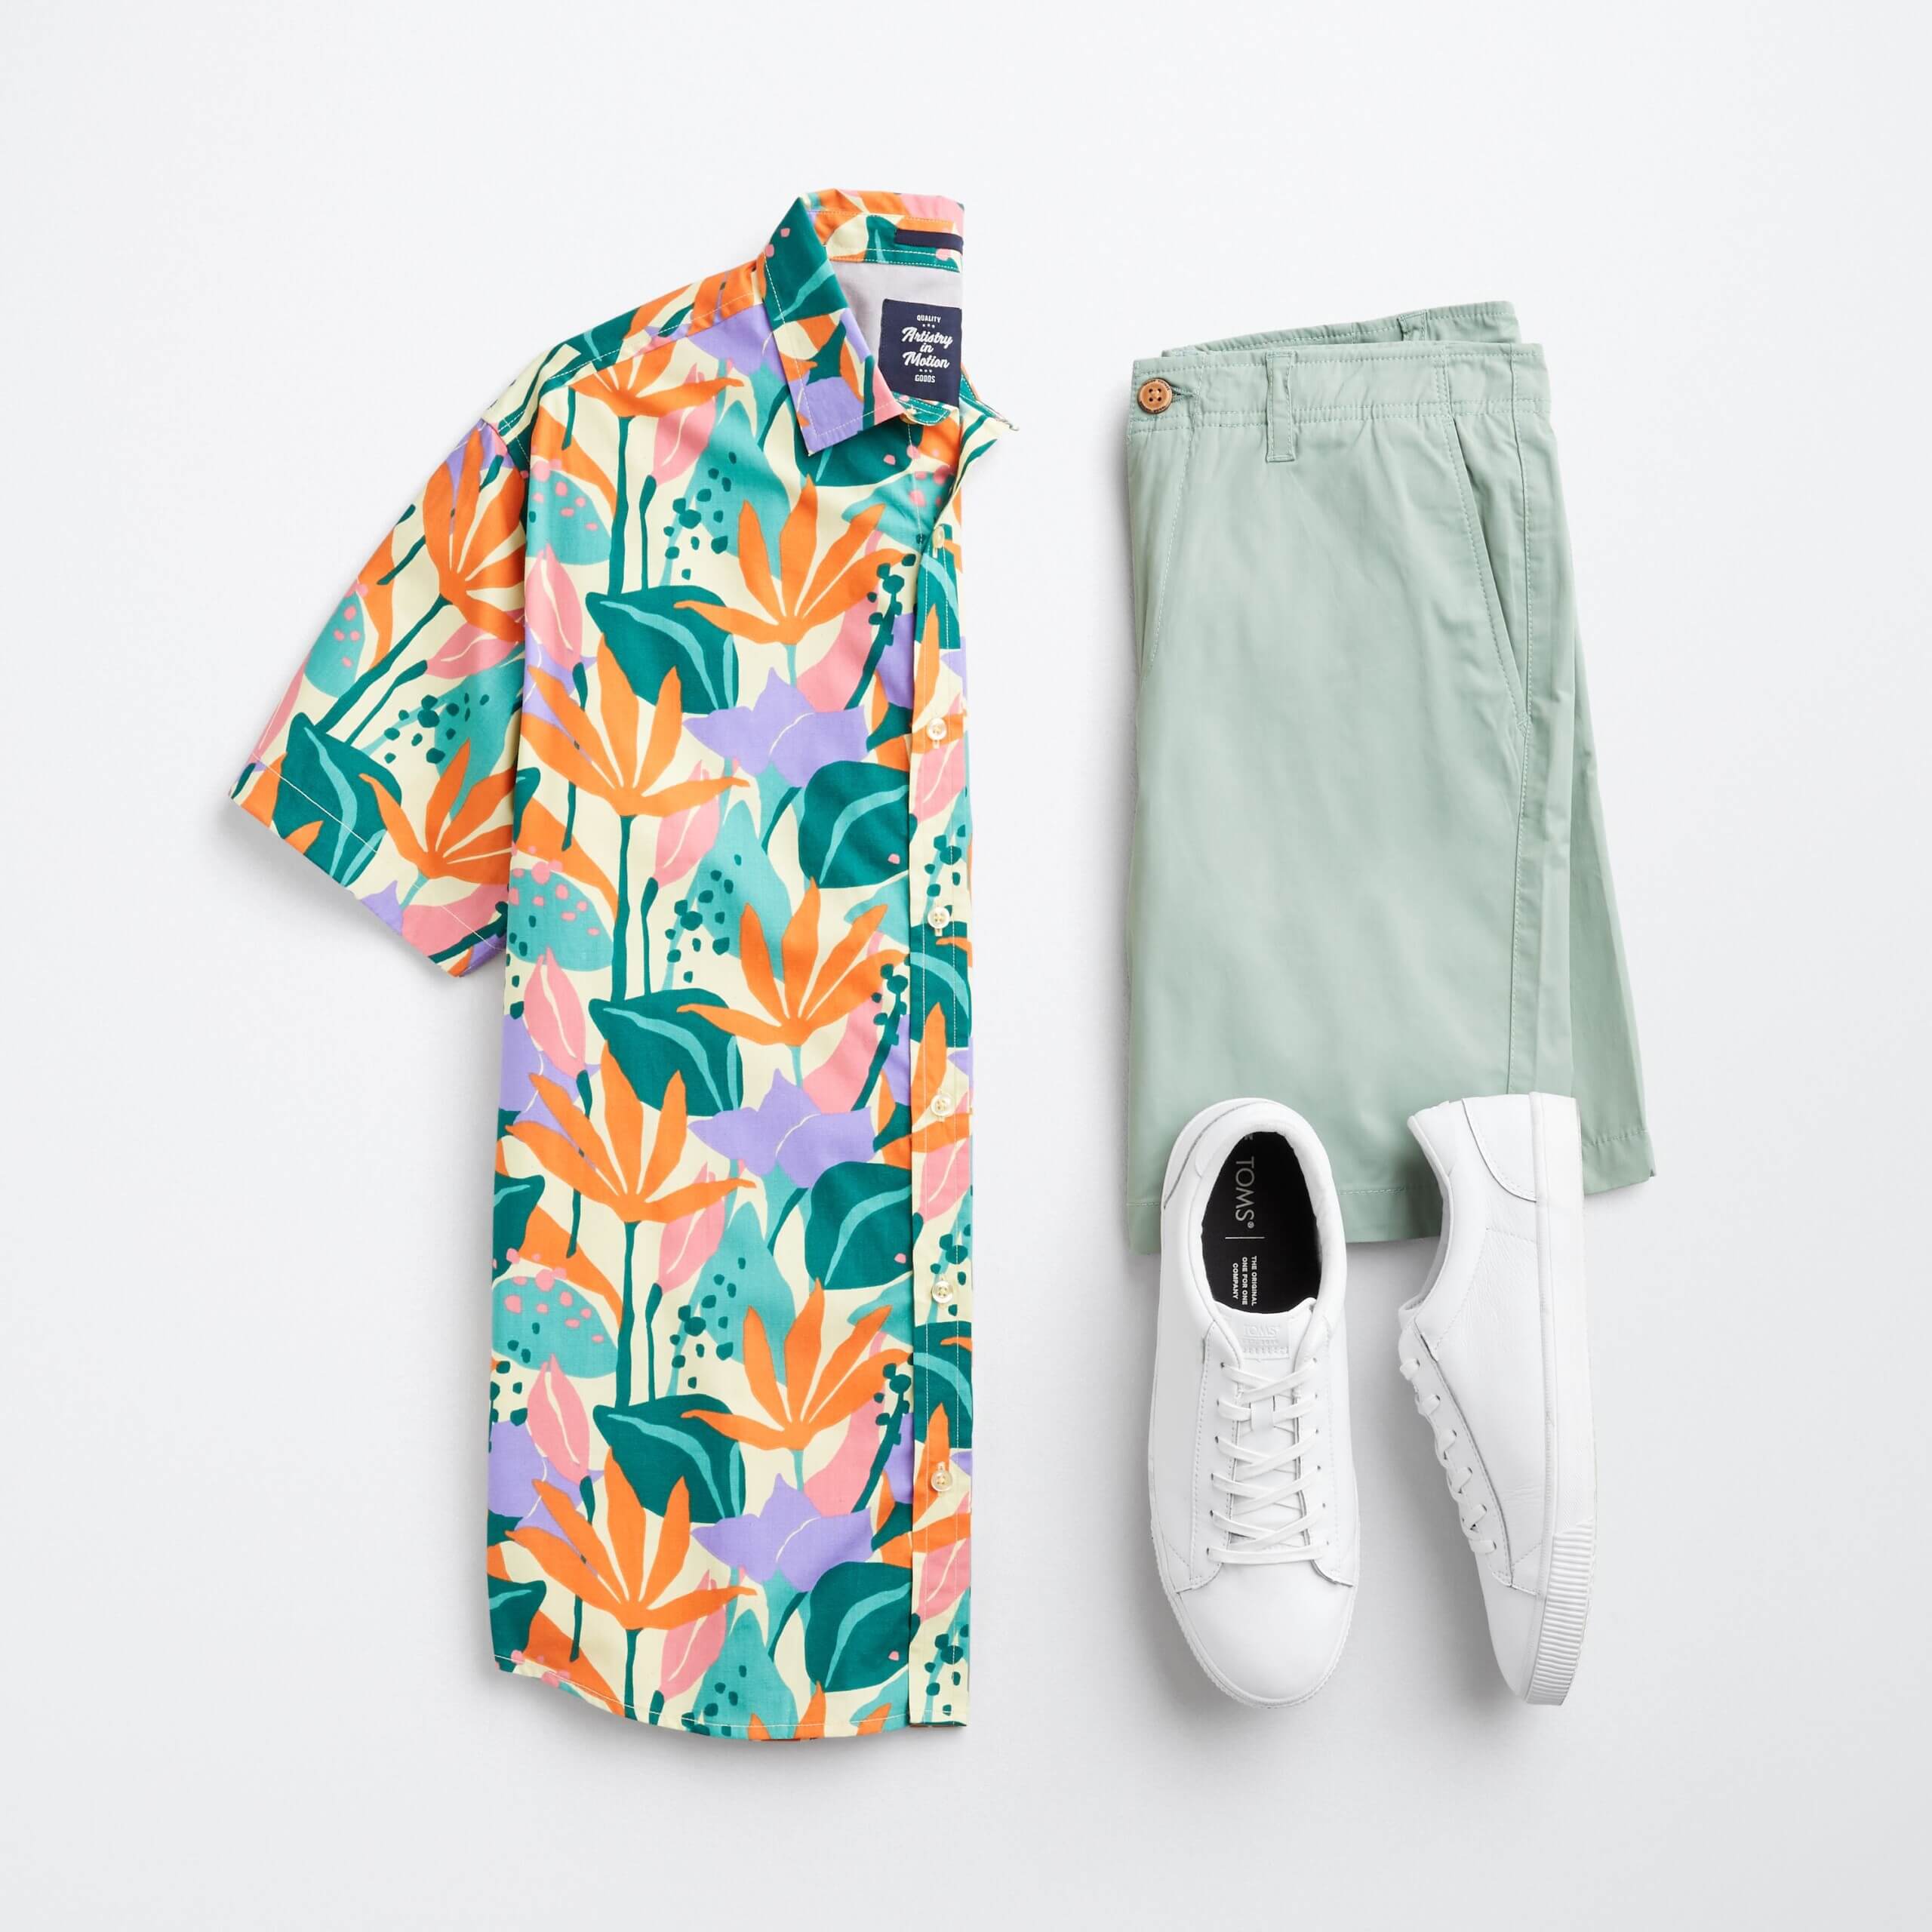 Stitch Fix Men's tropical button-down shirt with green shorts and white sneakers. 